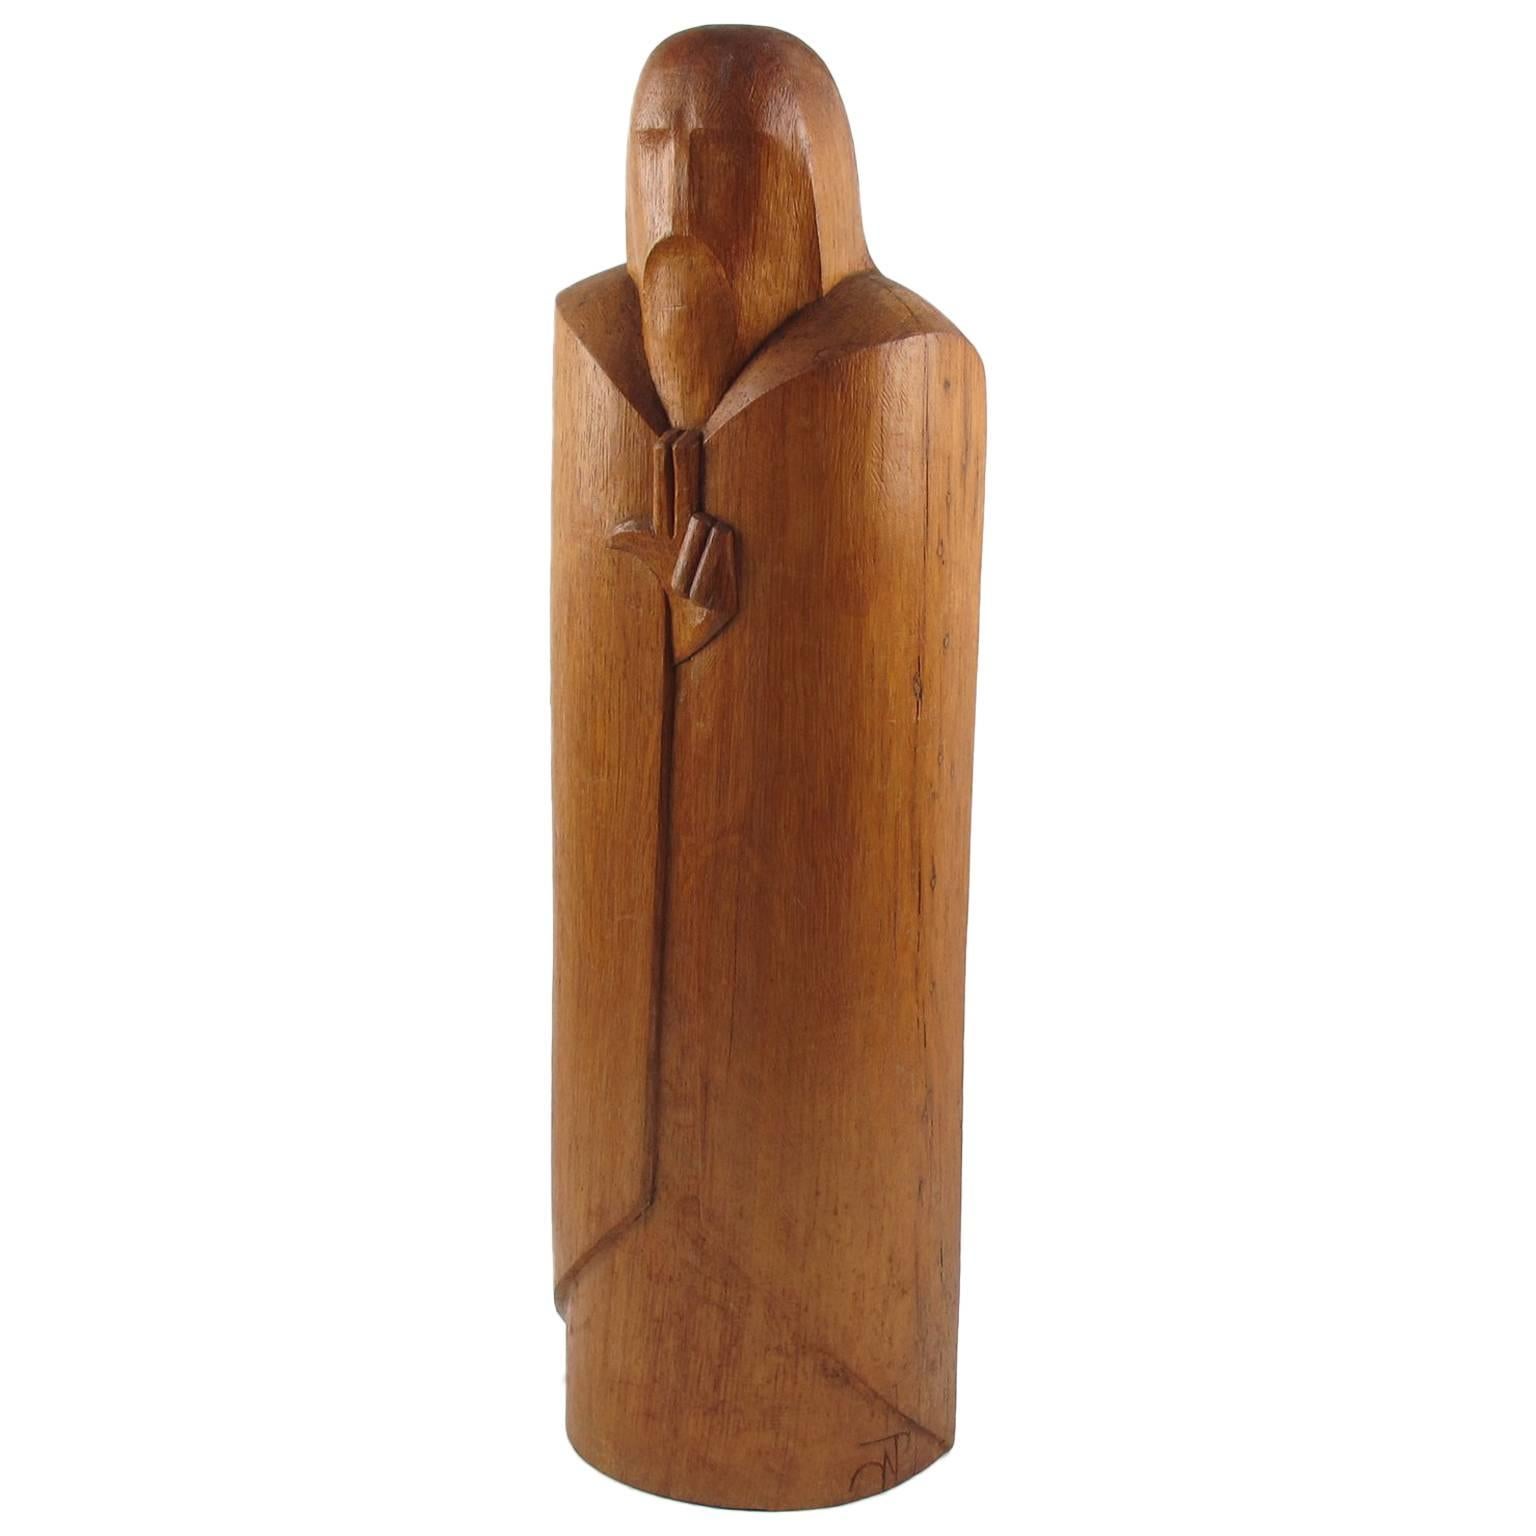 Rare Wood Sculpture Monk or Knight Design by Wenzel Profant, circa 1950s